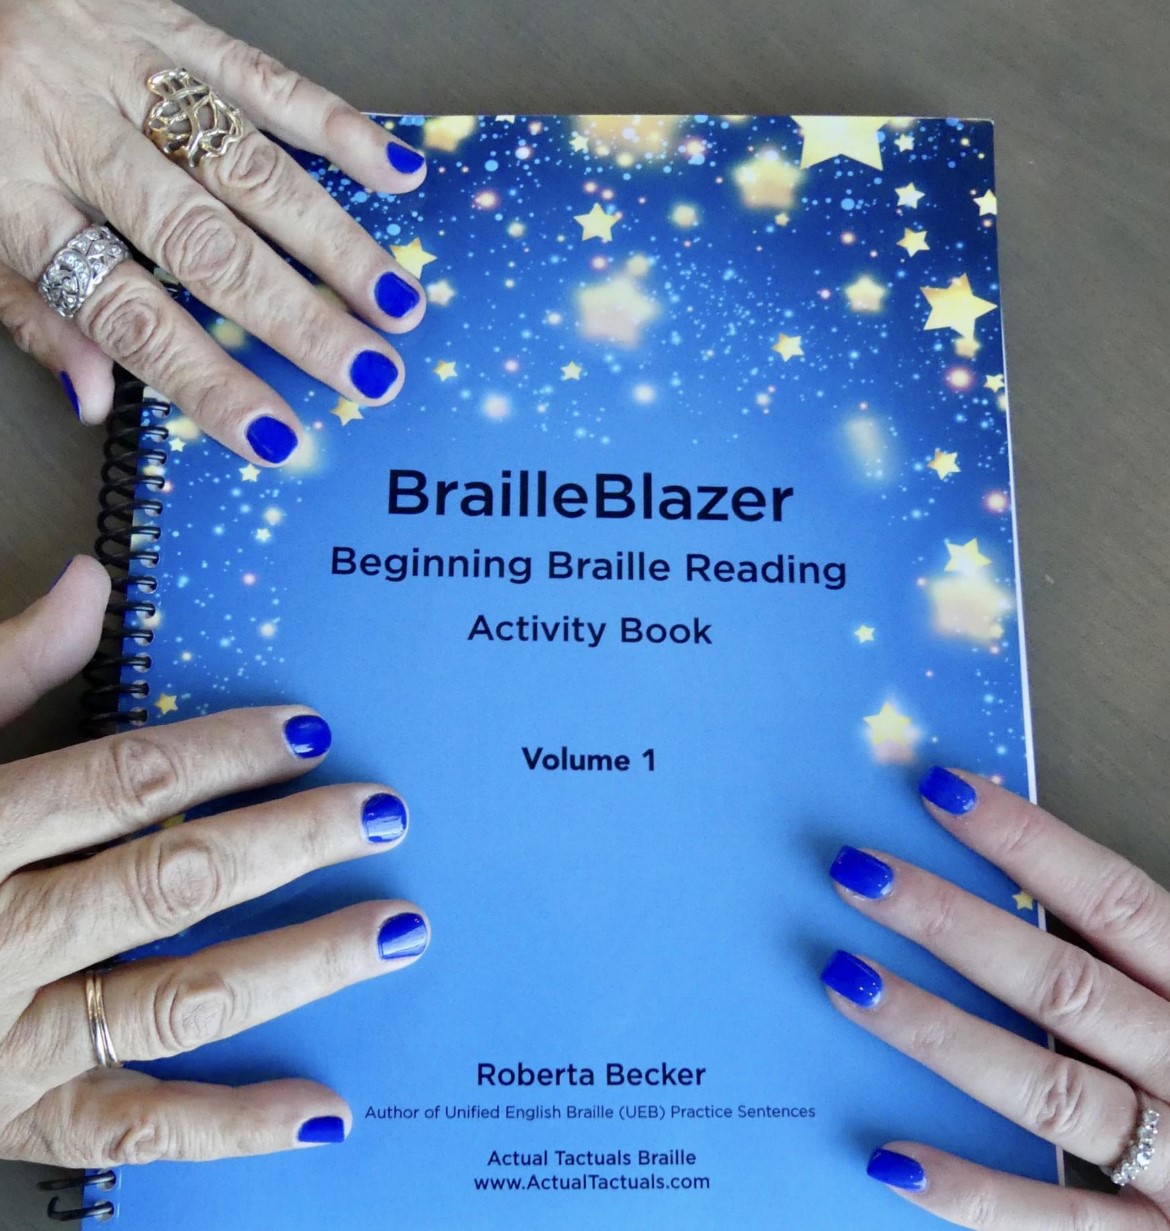 Cover of the BrailleBlazer book with hands on the book.